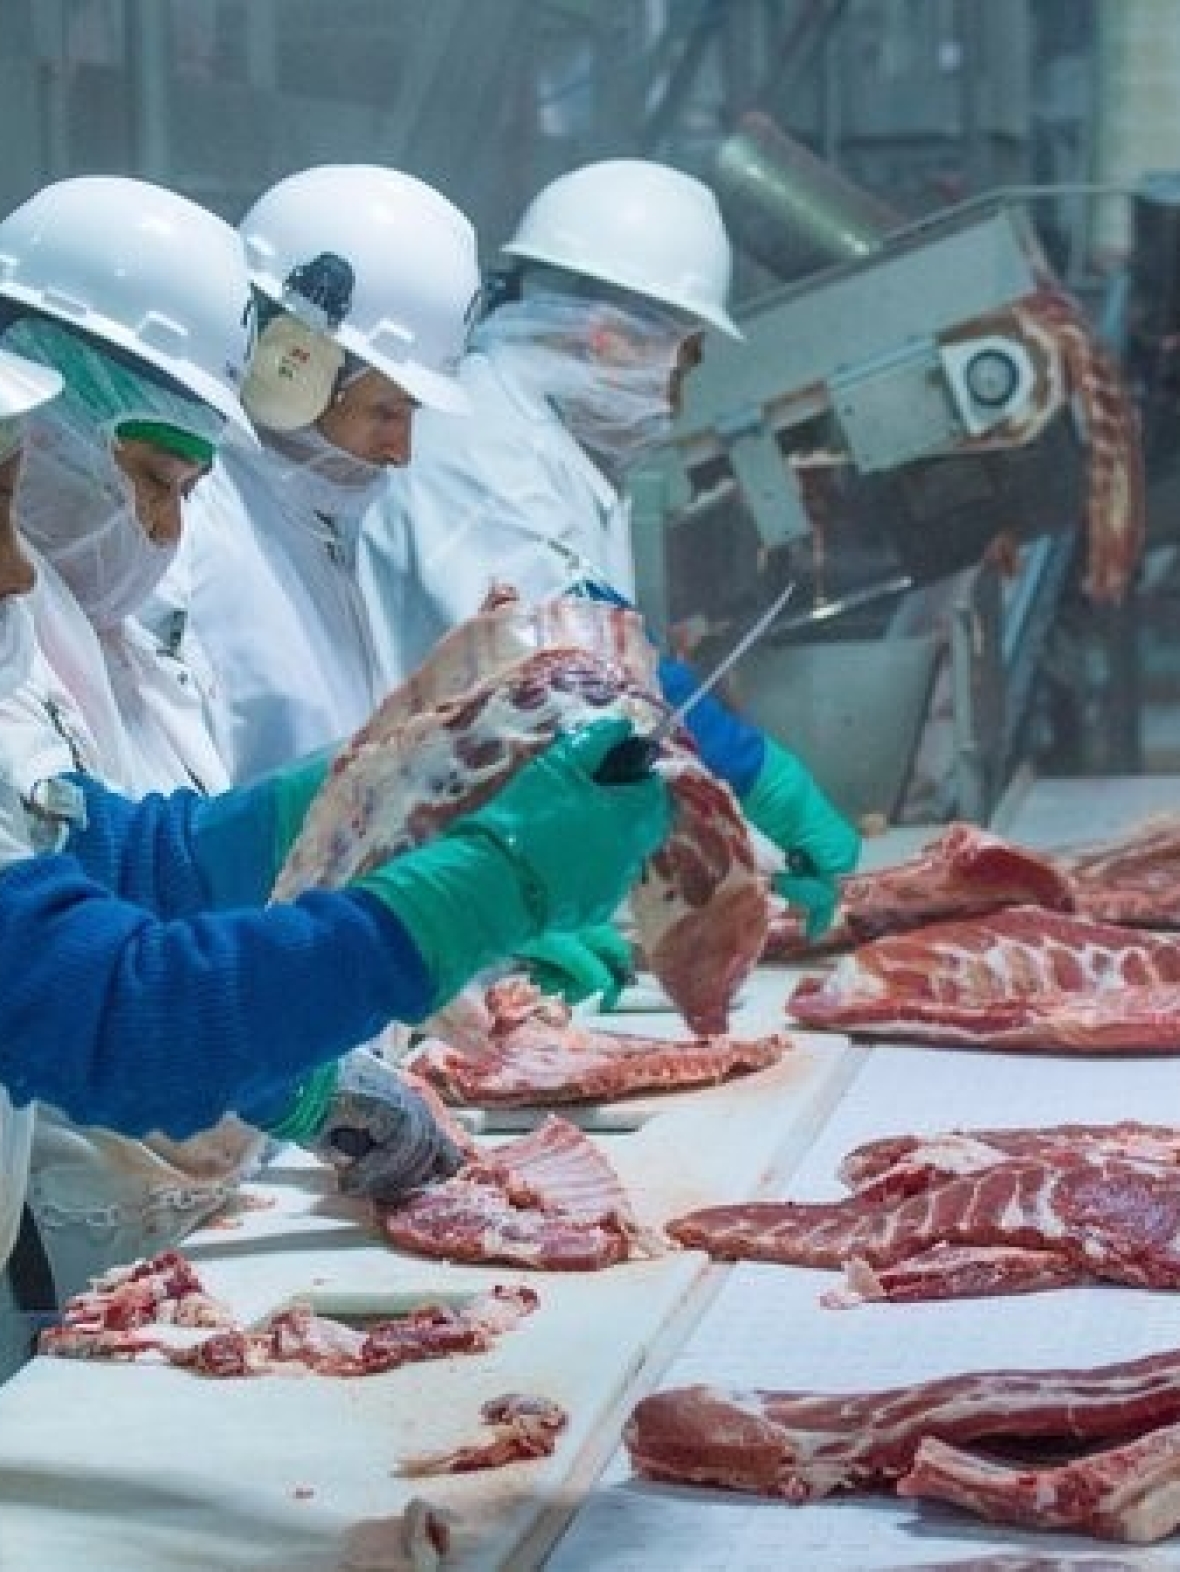 Tell America’s Meat & Poultry Processors: Protect Your Workers!